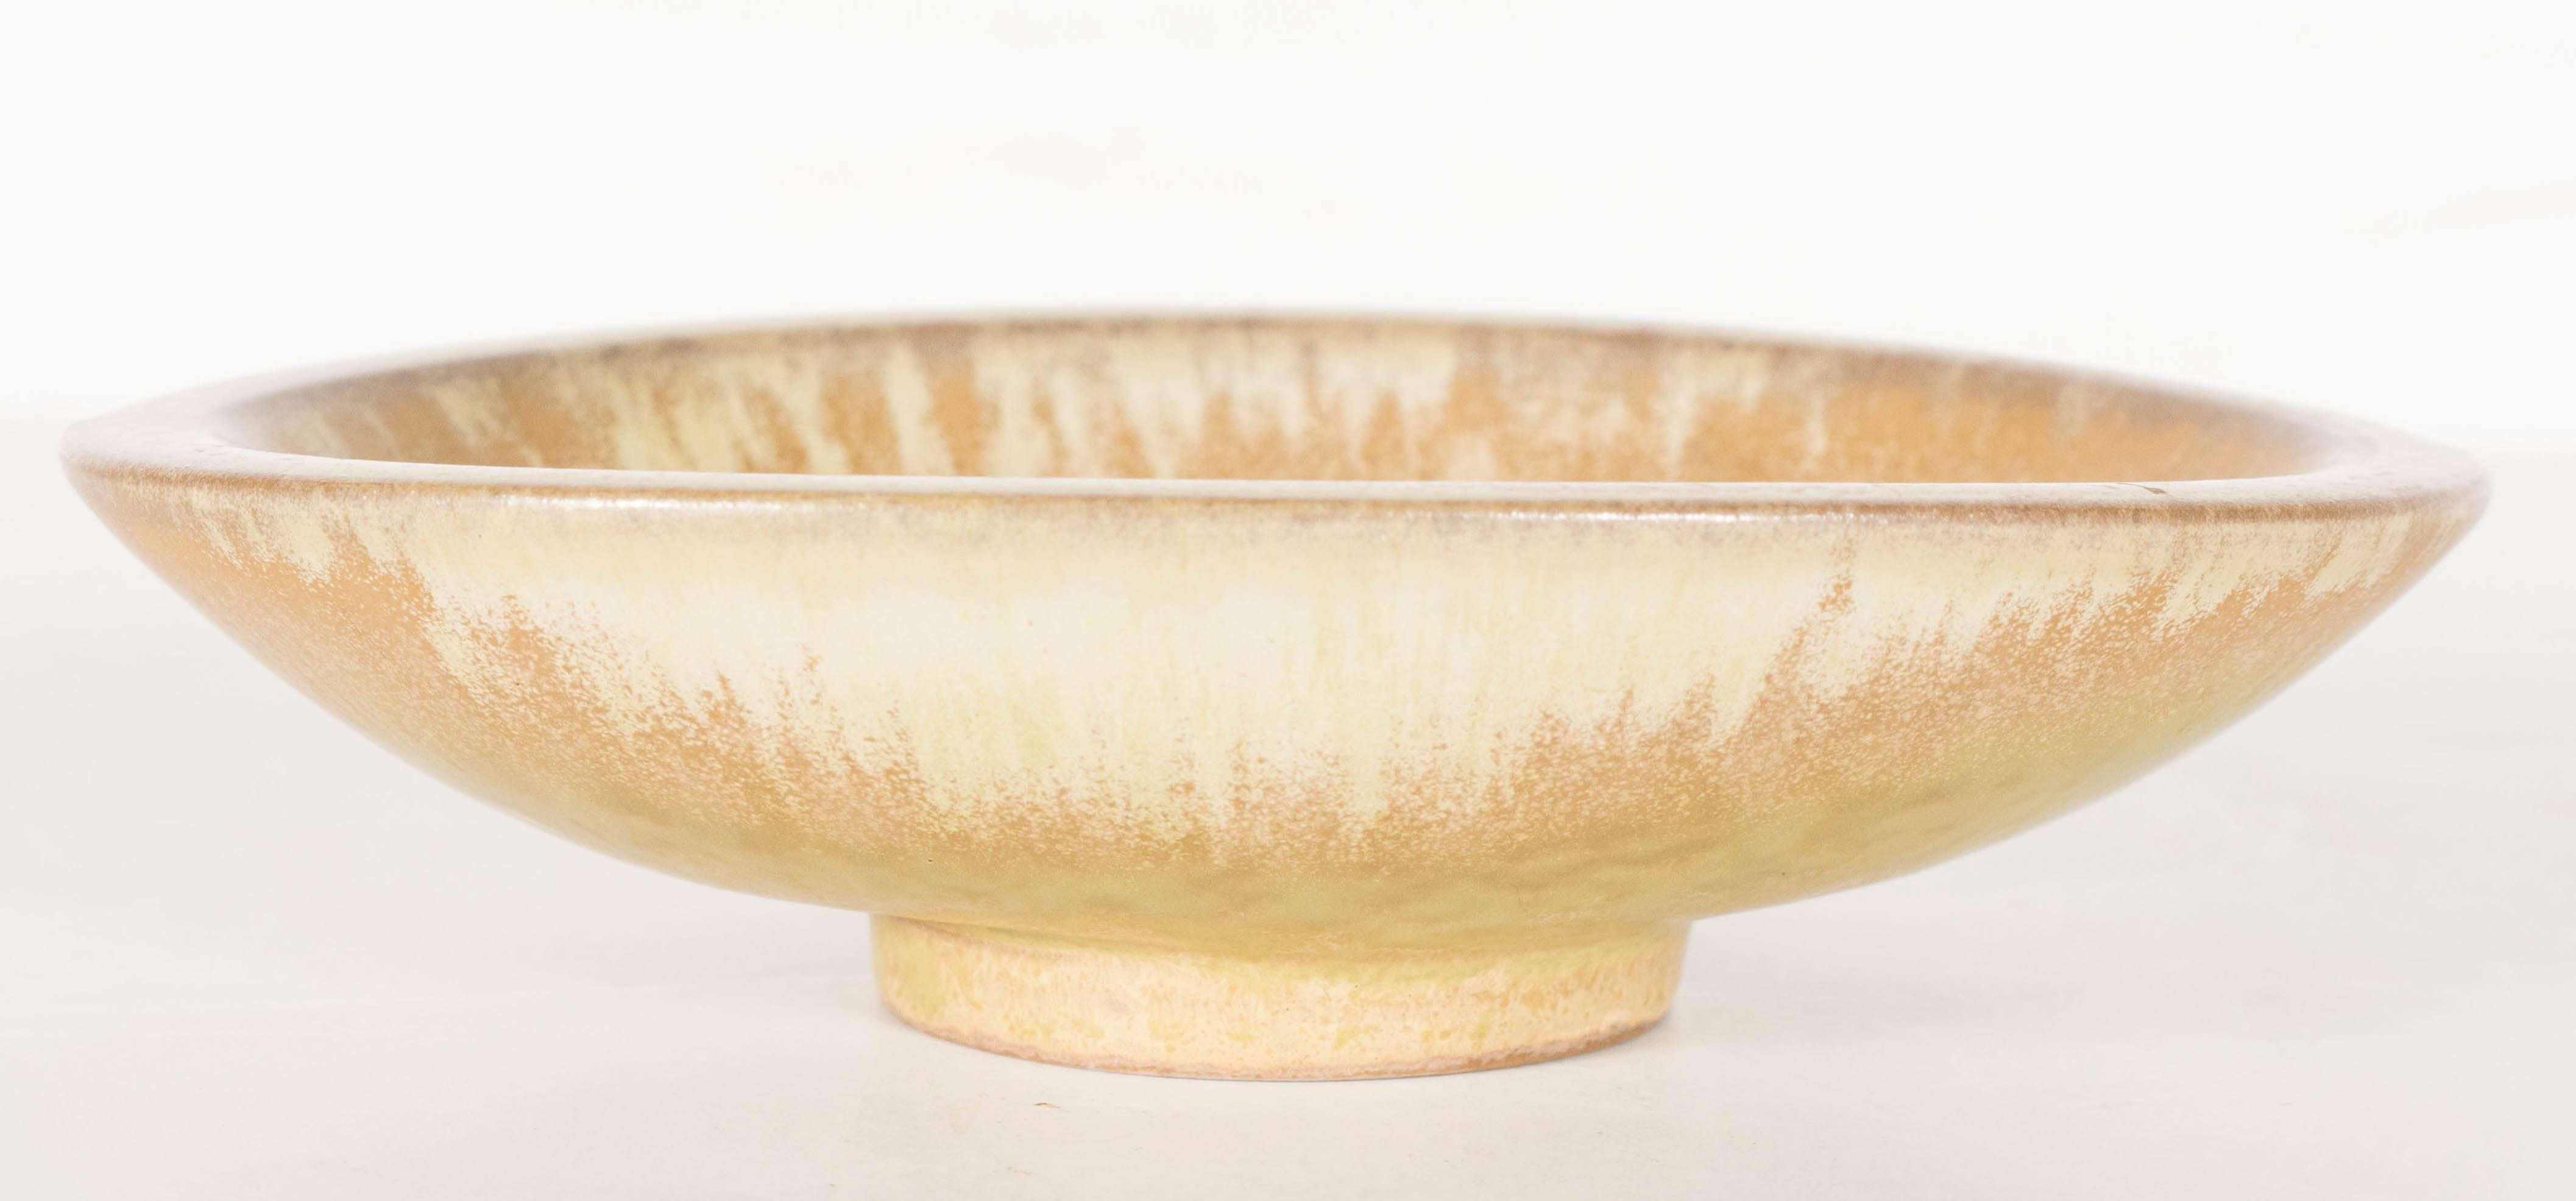 Handsome ceramic bowl by Gunnar Nylund for Rörstrand. Lovely hues of moss and cream adorn this piece. Perfect as a small catch-all, soap dish or simply as an object. This piece is signed and in excellent condition.